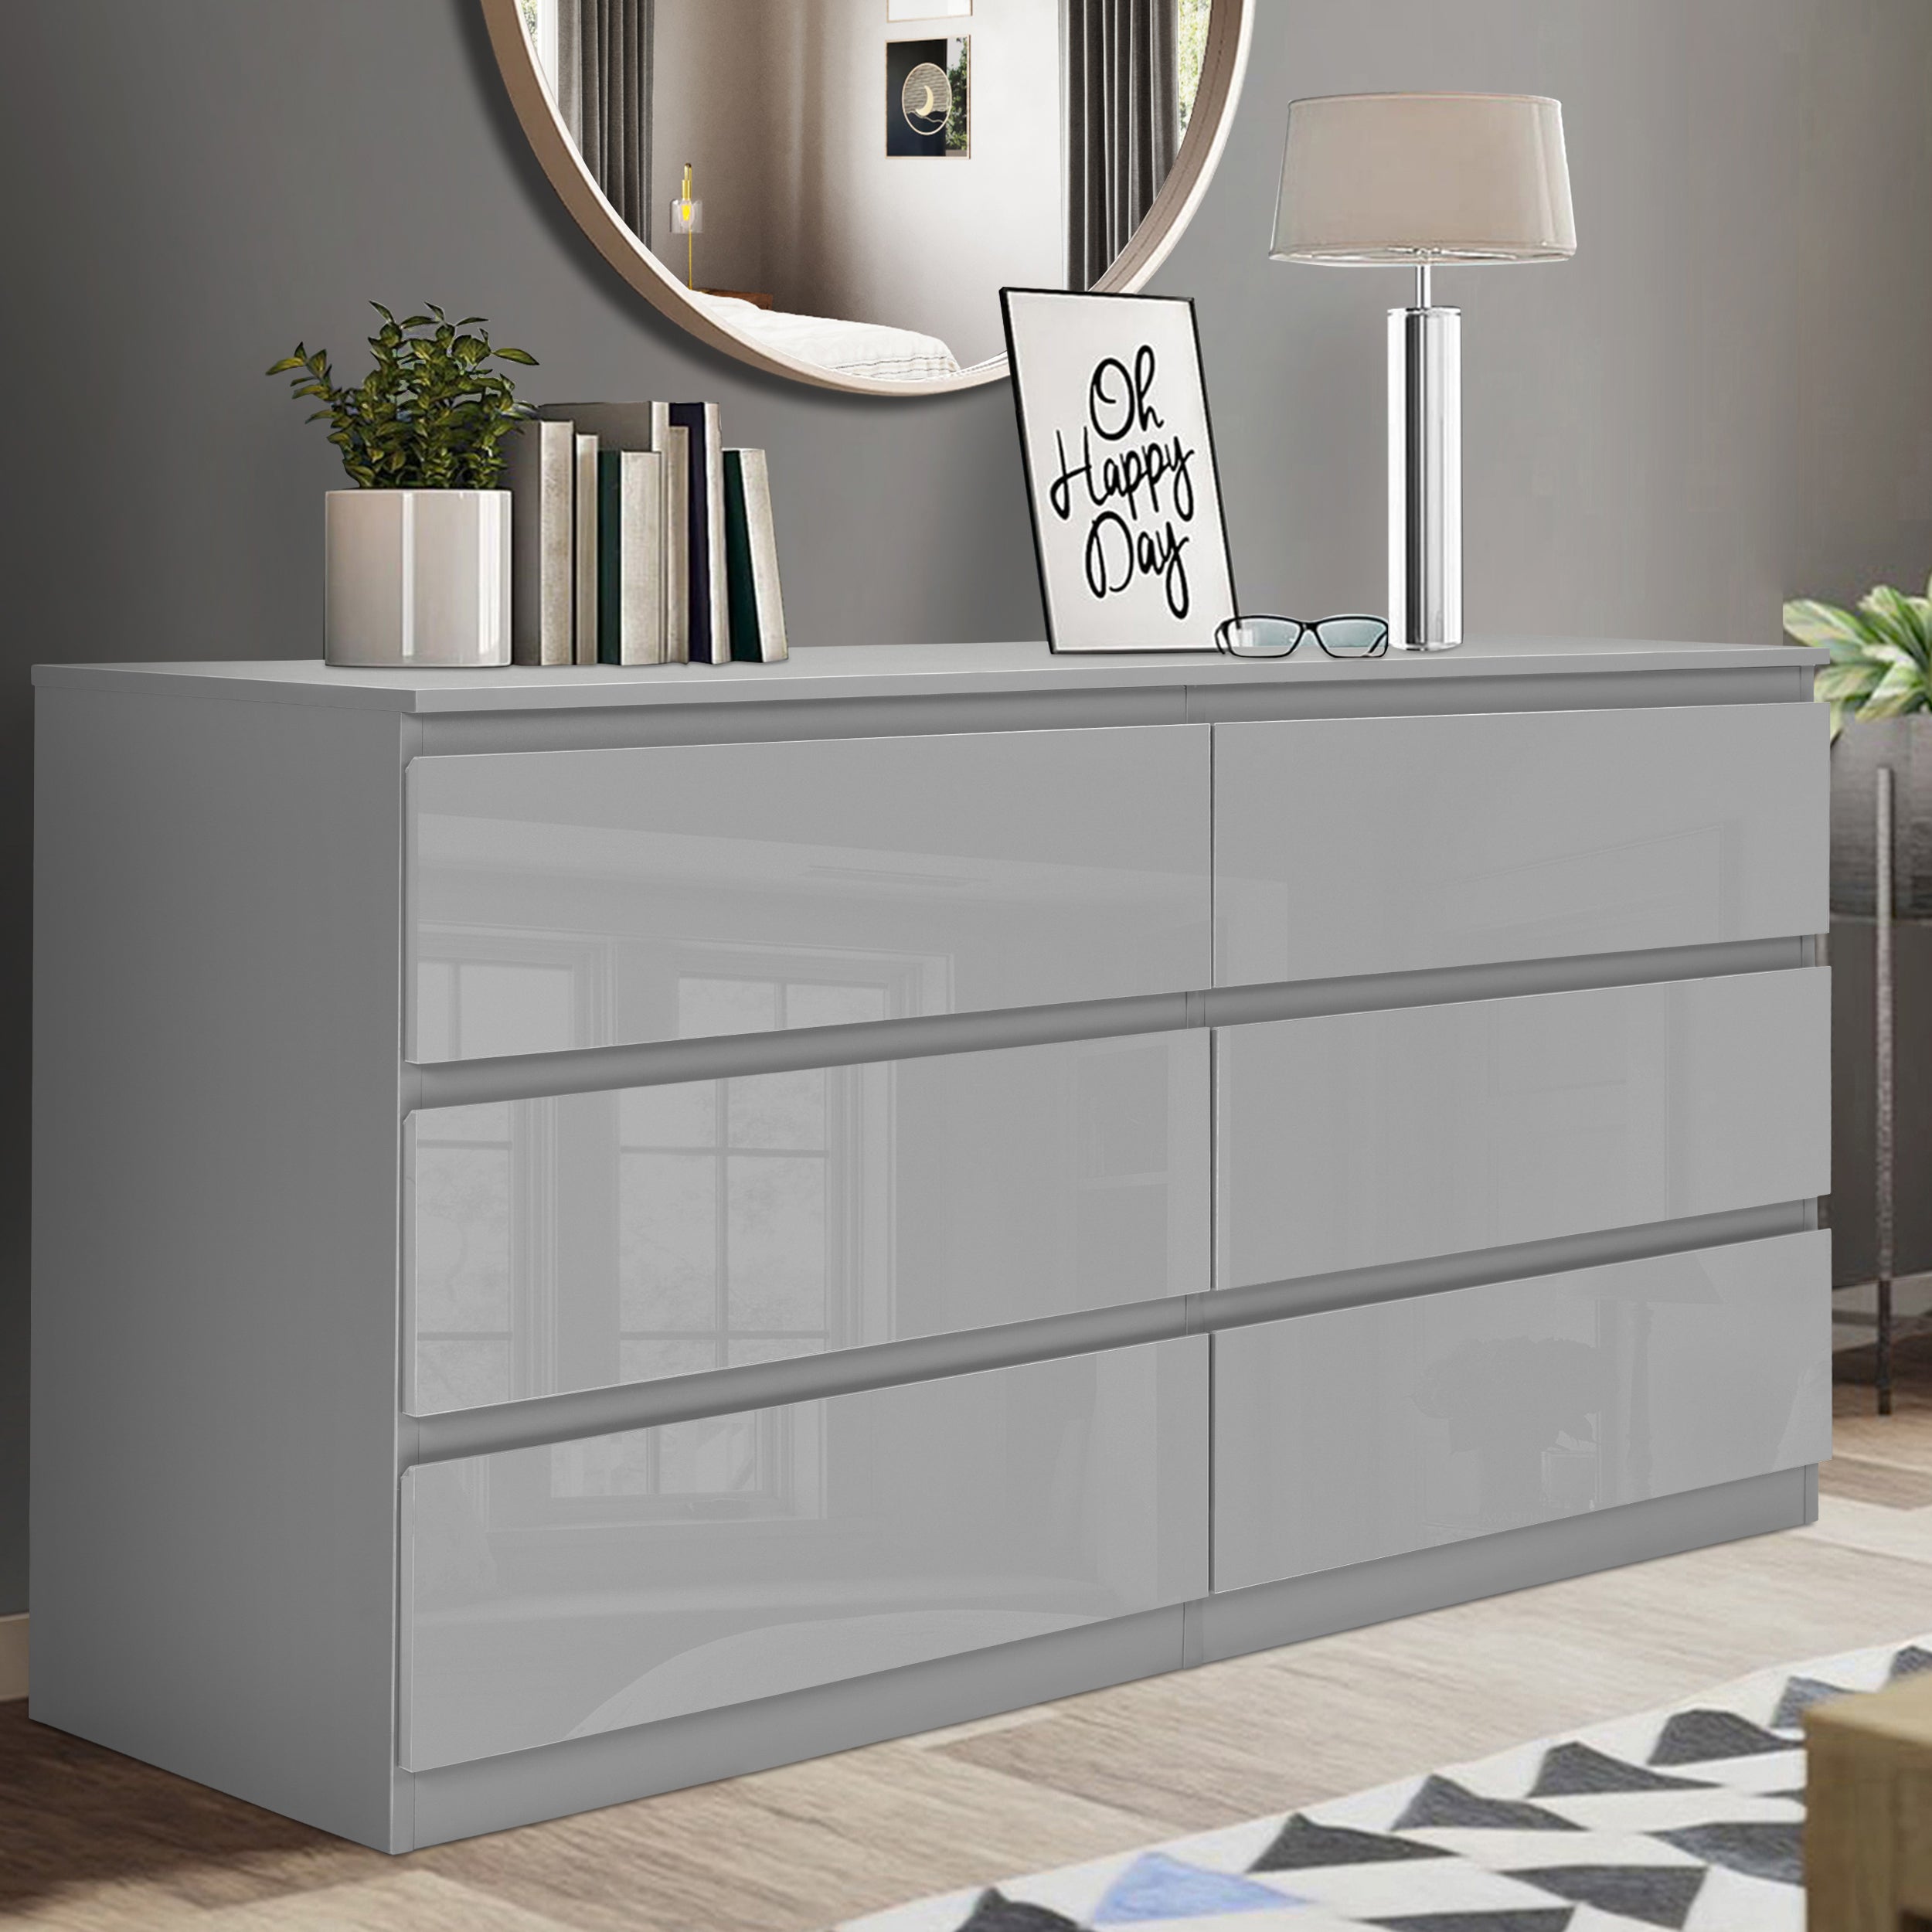 Blisswood UV High Gloss Dressers, Chest of 6 Drawers